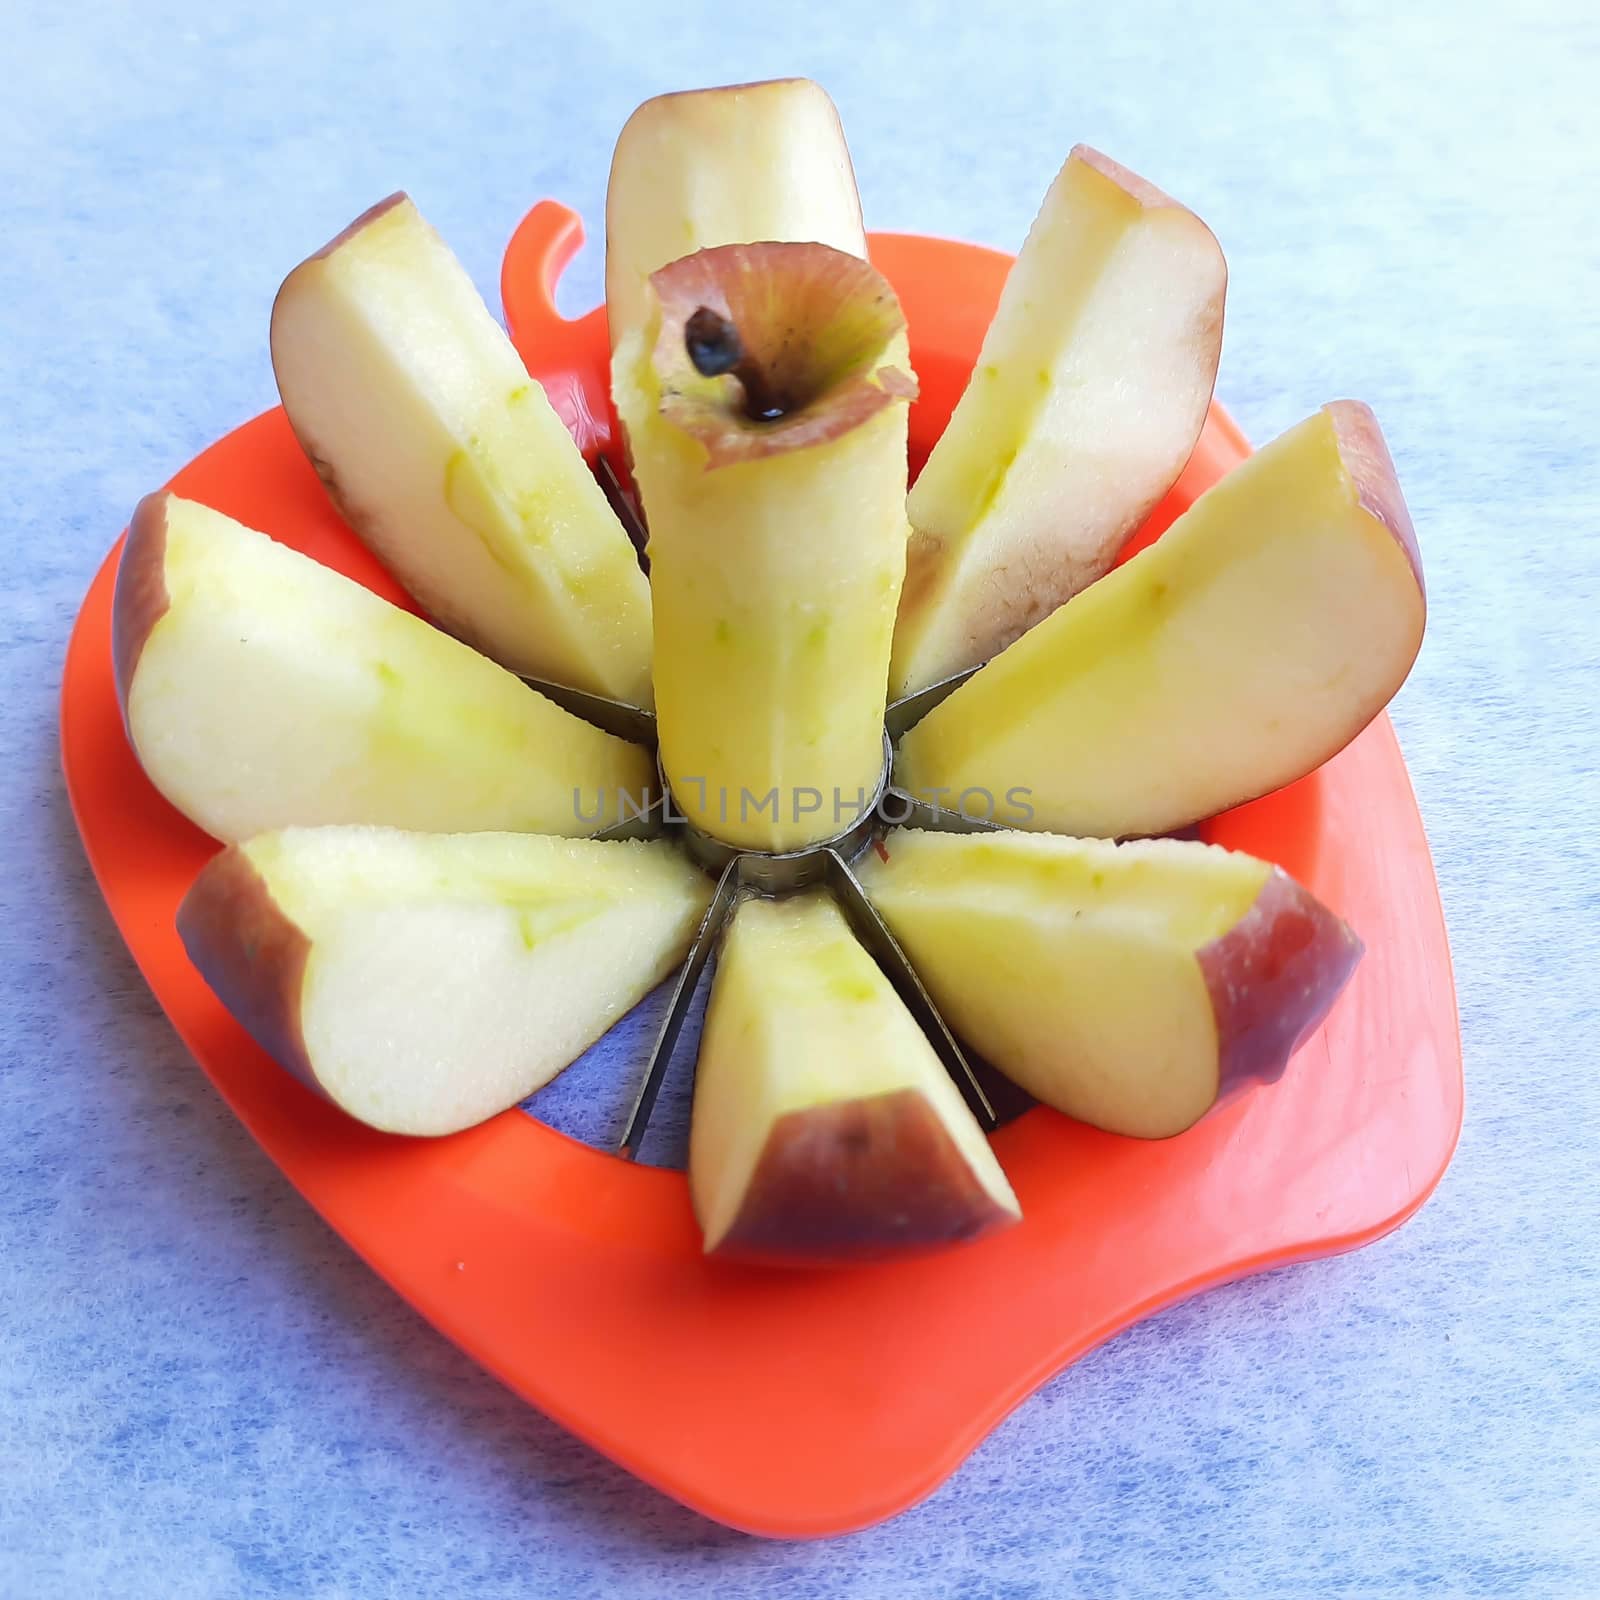 Apple shown beautifully in apple cutter like flower shape and it tempts to eat in white background